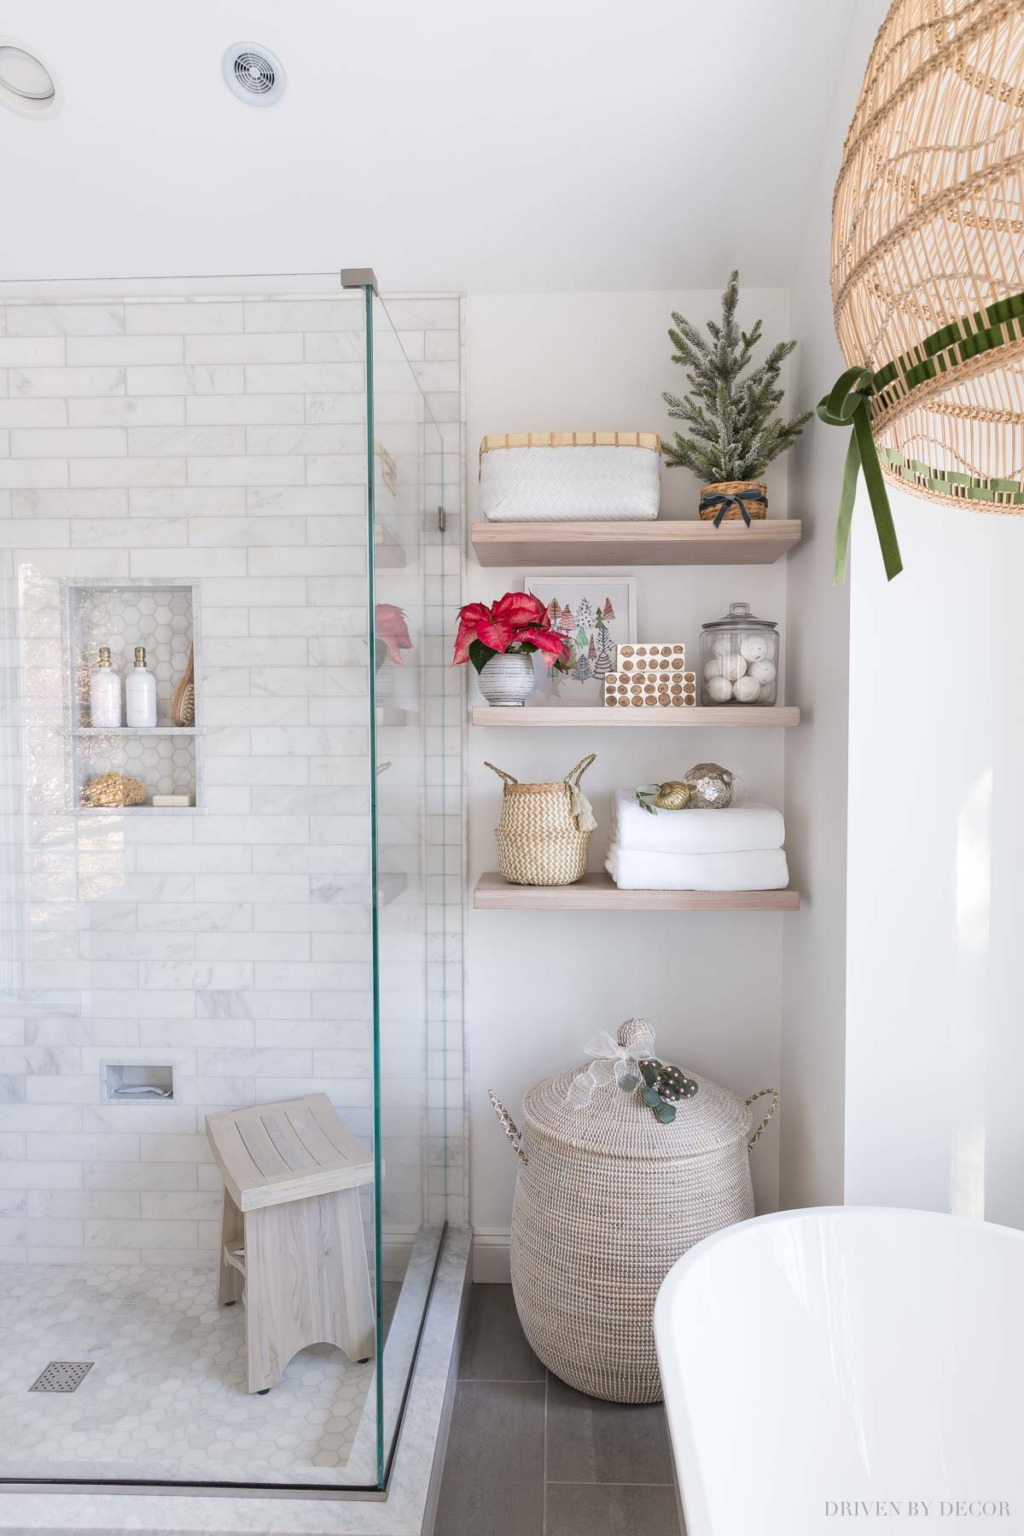 10 Master Bathroom Remodel Ideas You'll Want to Steal! - Driven by Decor